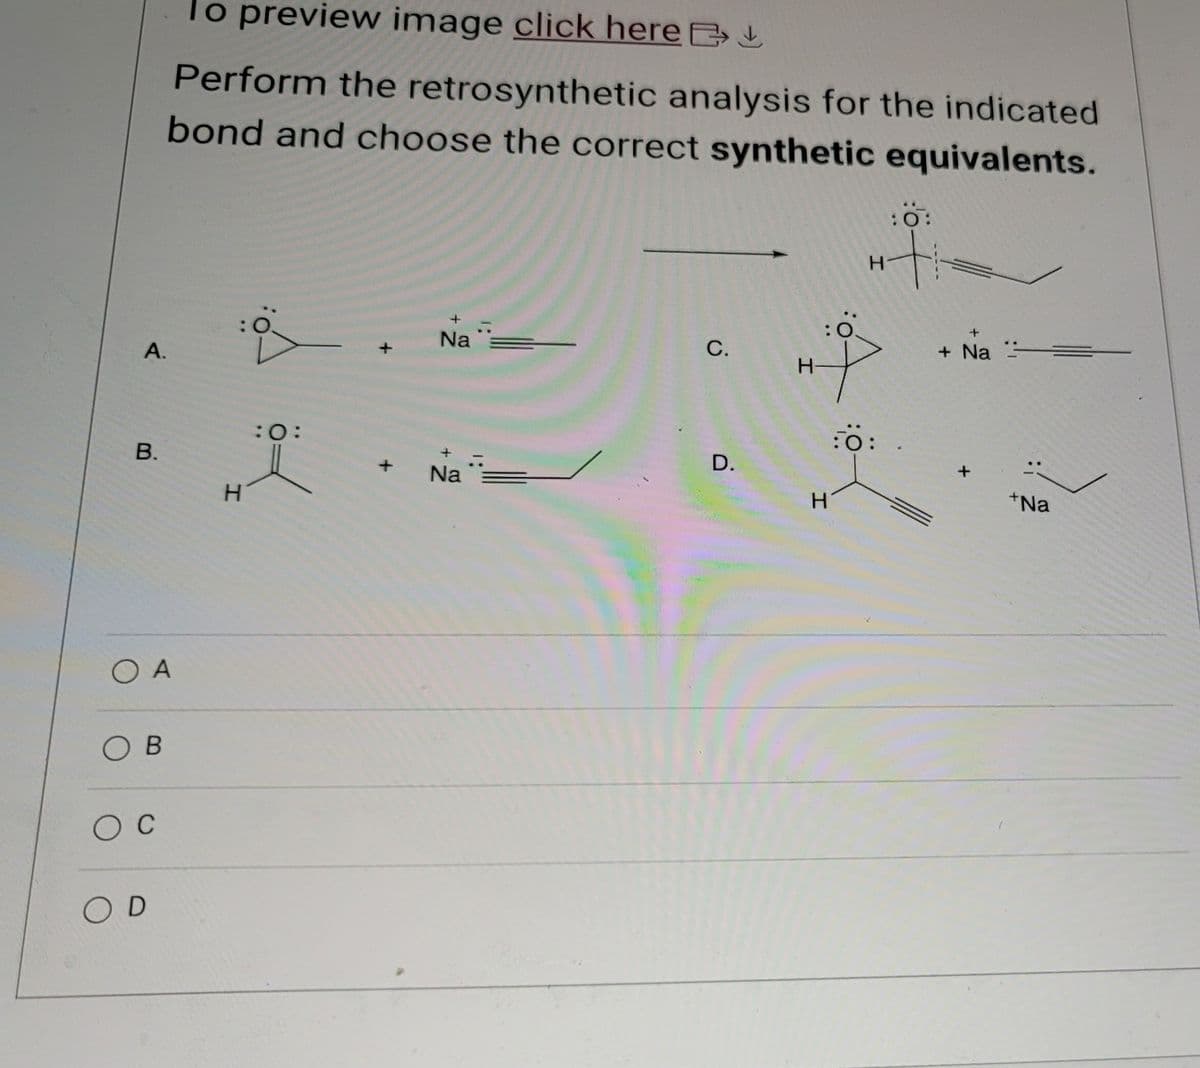 To preview image click here >
Perform the retrosynthetic analysis for the indicated
bond and choose the correct synthetic equivalents.
:0:
H+
A.
B.
H
:0:
OA
OB
O C
OD
Na
1:
+
+
Na
1:
C.
H-
+
+ Na
:0:
+Na
D.
H